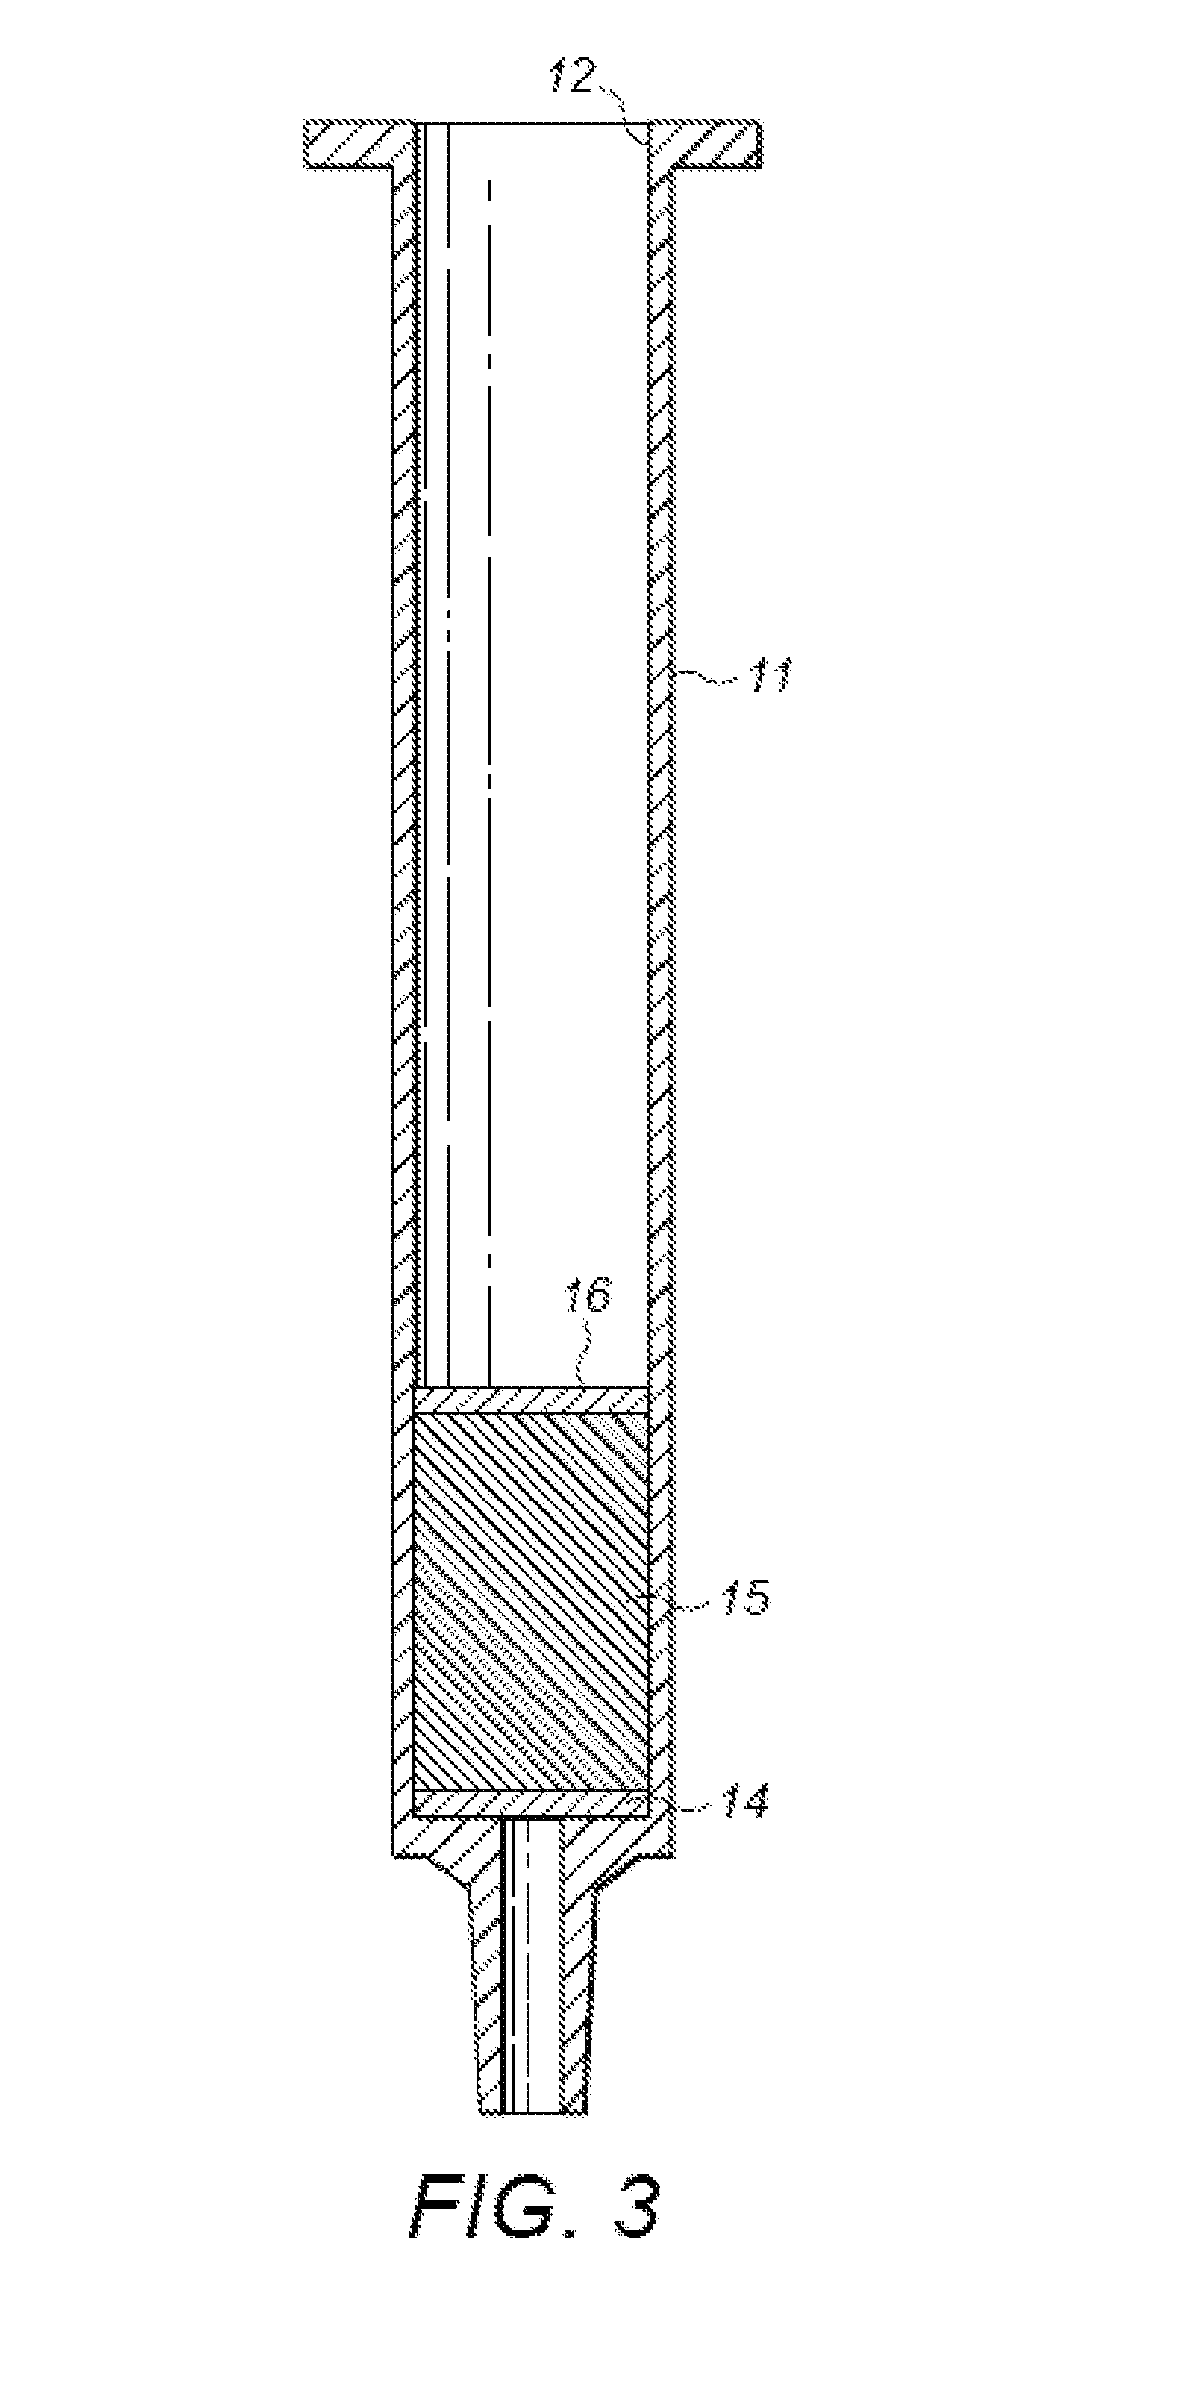 Polymers Selective for Nitro-Containing Compounds and Methods of Using the Same